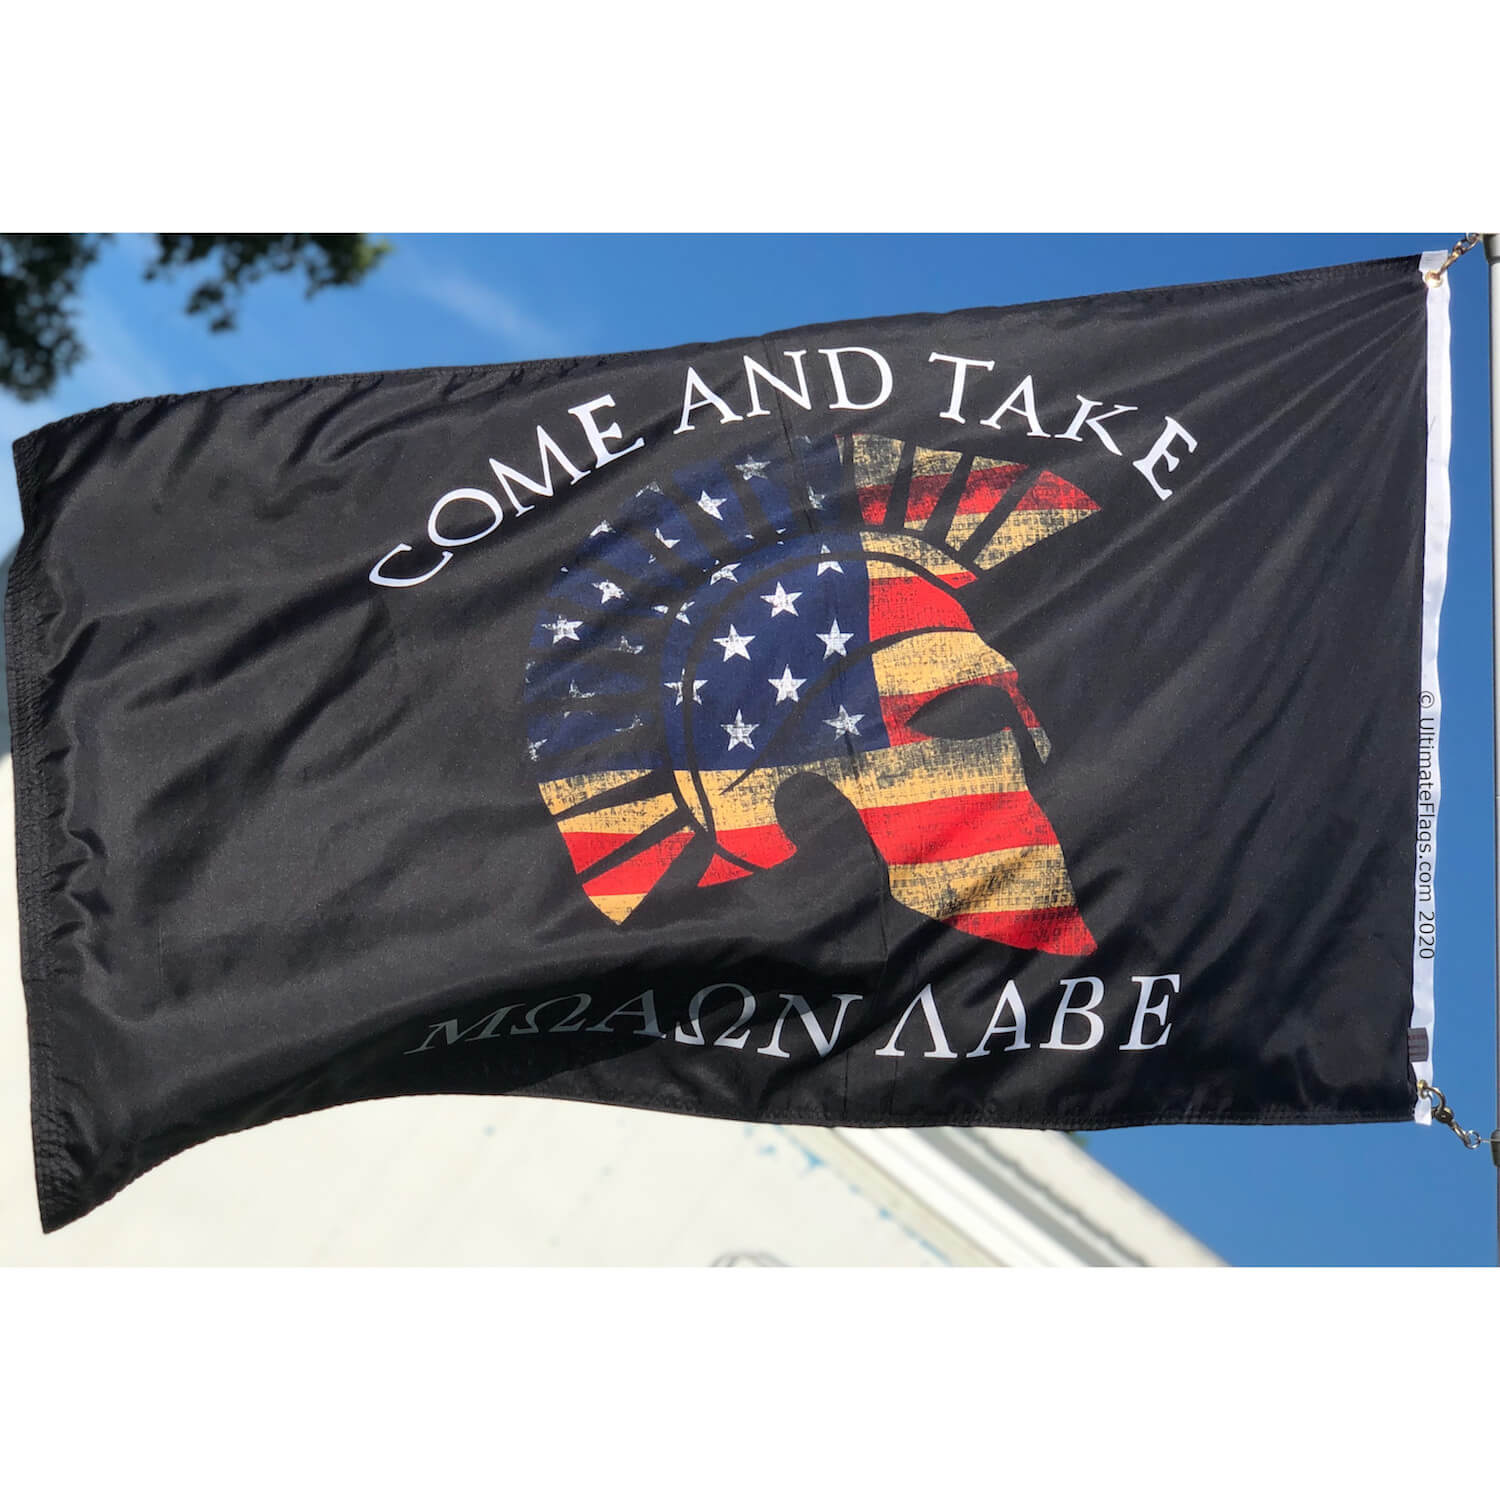 Ultimate Flags Inc: Where Every Flag Tells a Story